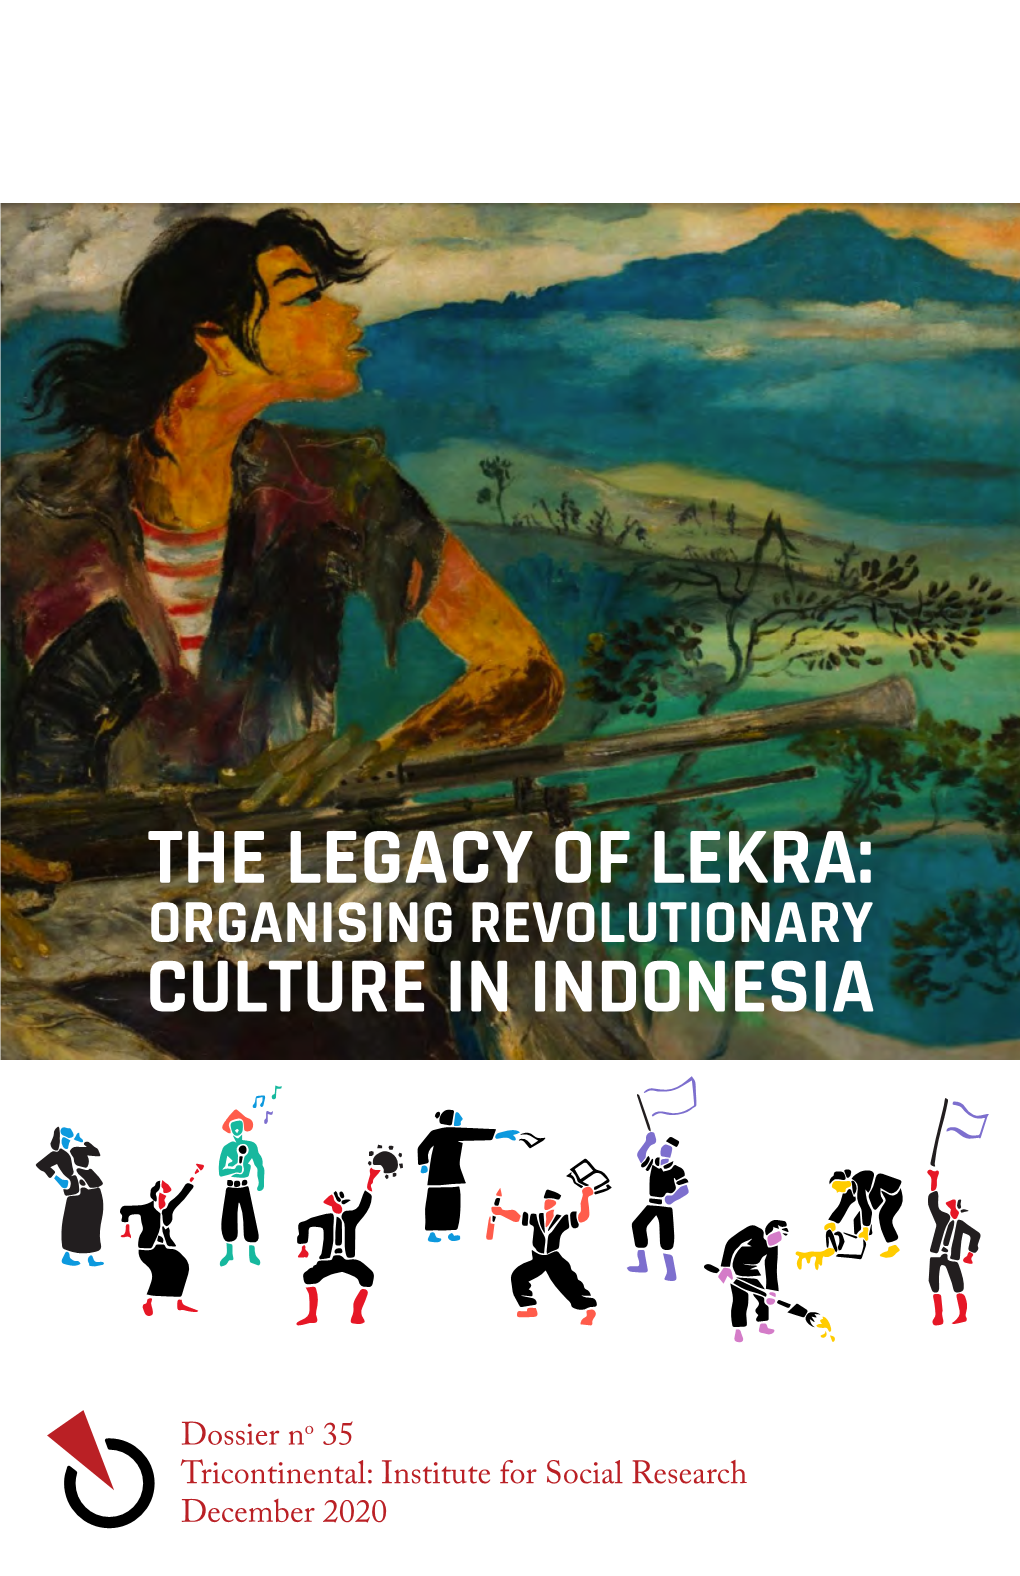 The Legacy of Lekra: Organising Revolutionary Culture in Indonesia